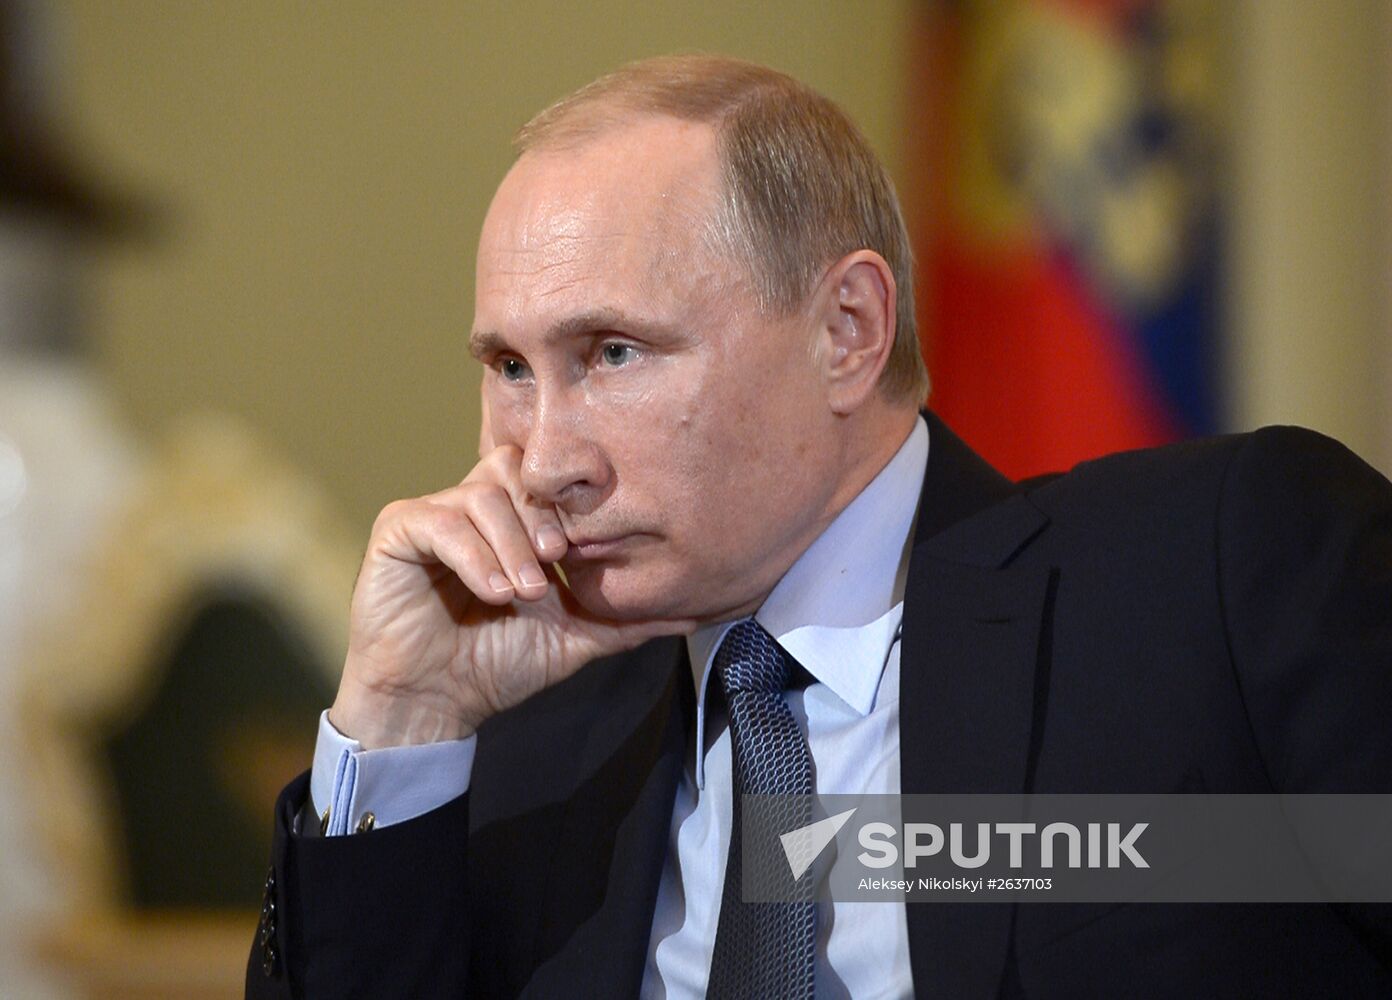 President Vladimir Putin gives interview to Il Corriere della Sera ahead of his visit to Italy